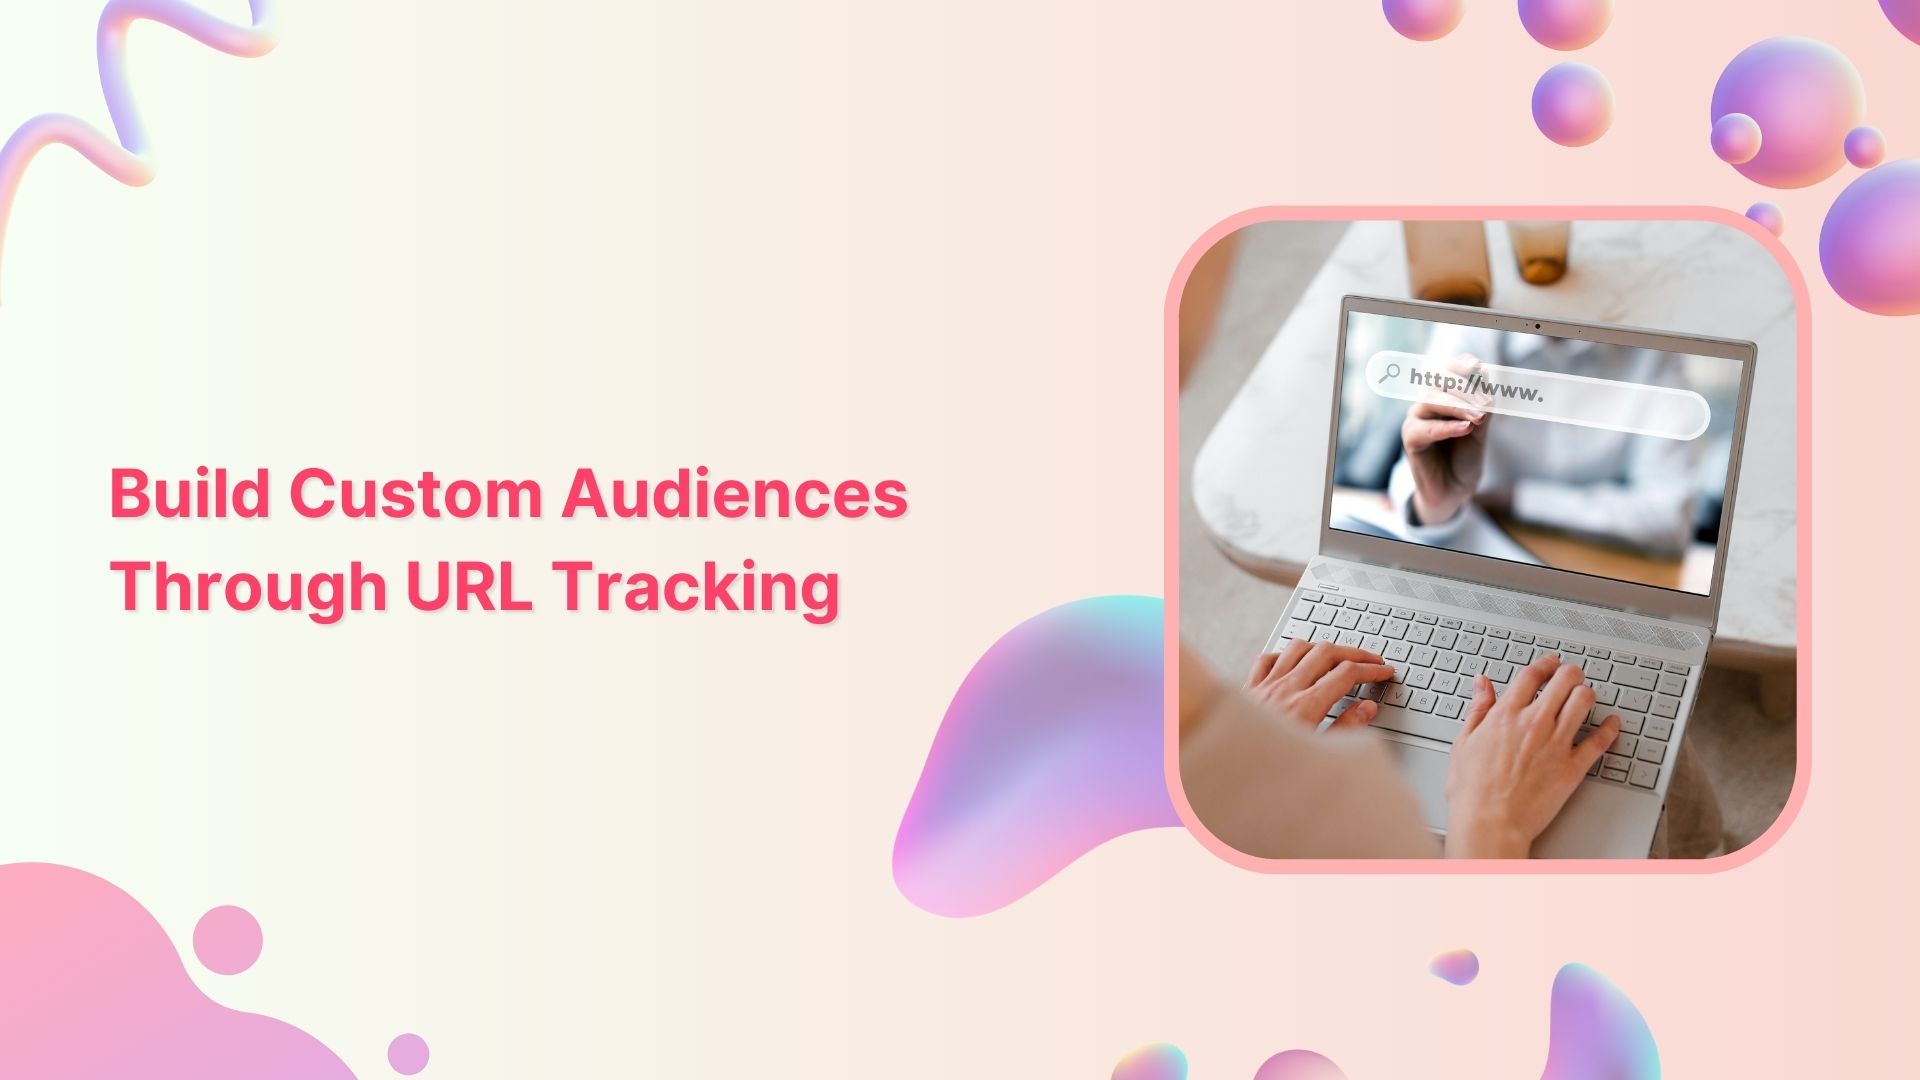 A Quick Guide to Building Custom Audiences through URL Tracking